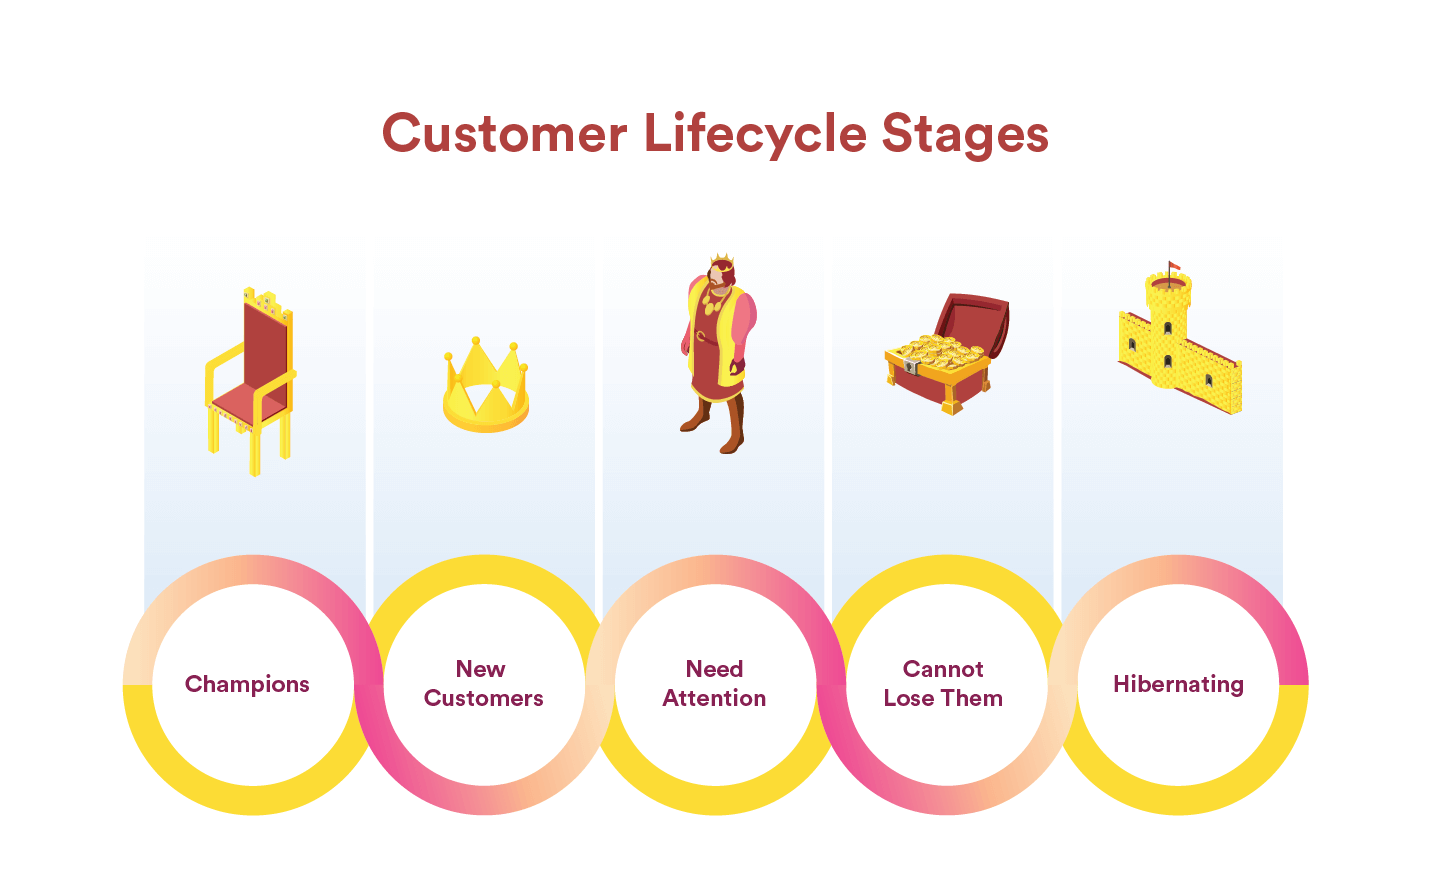 All customer lifecycle stages benefit from outstanding customer experiences